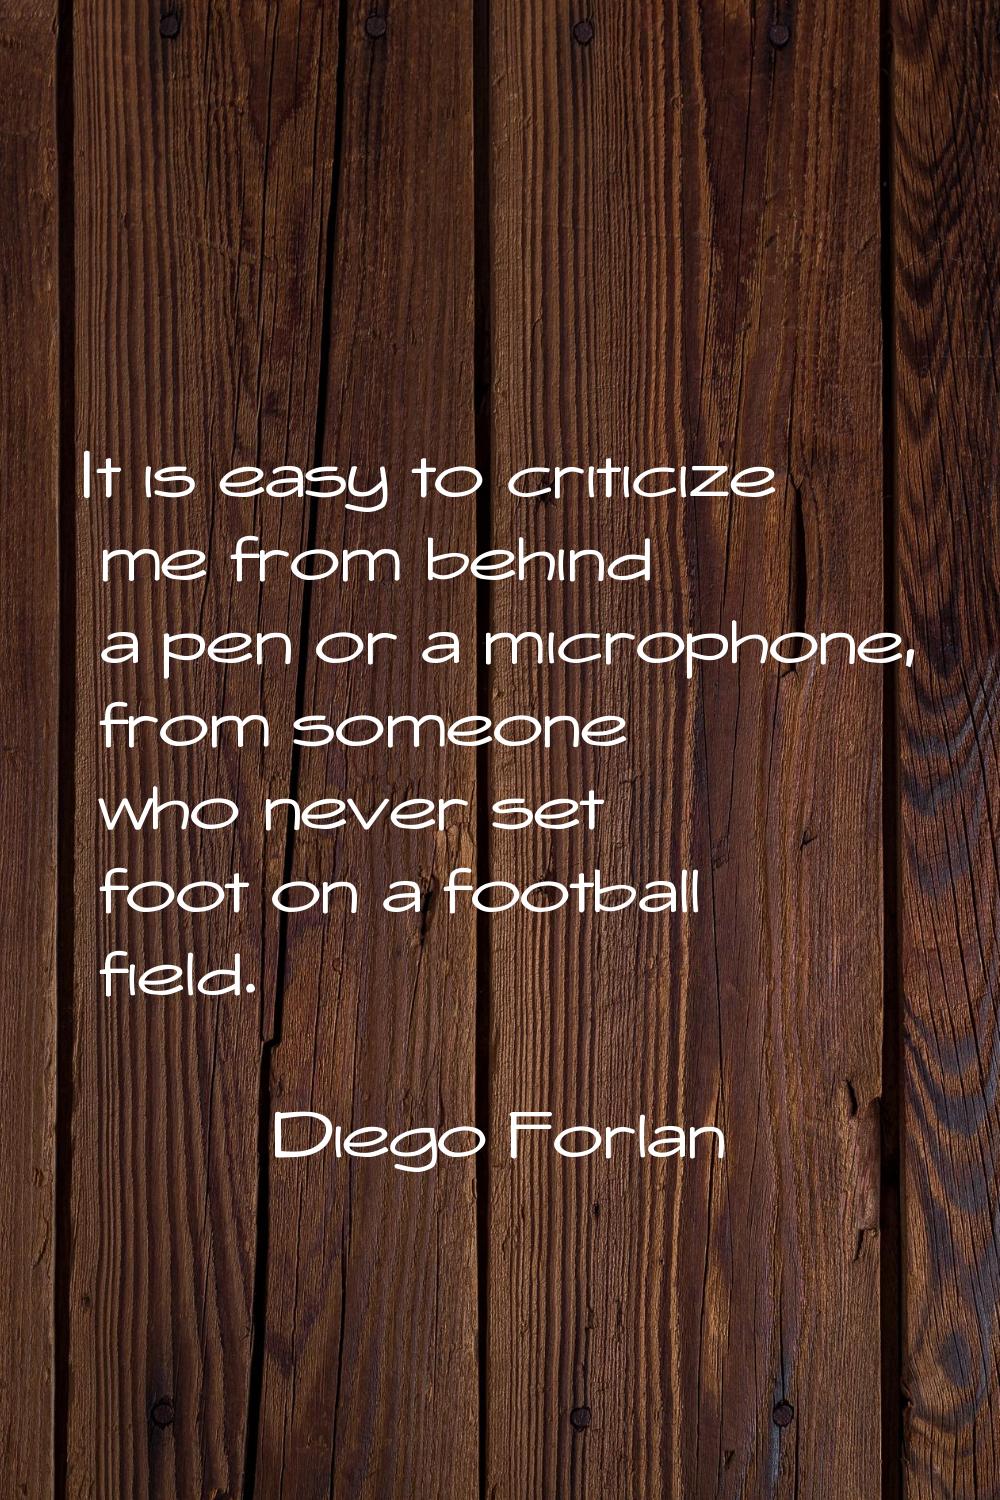 It is easy to criticize me from behind a pen or a microphone, from someone who never set foot on a 